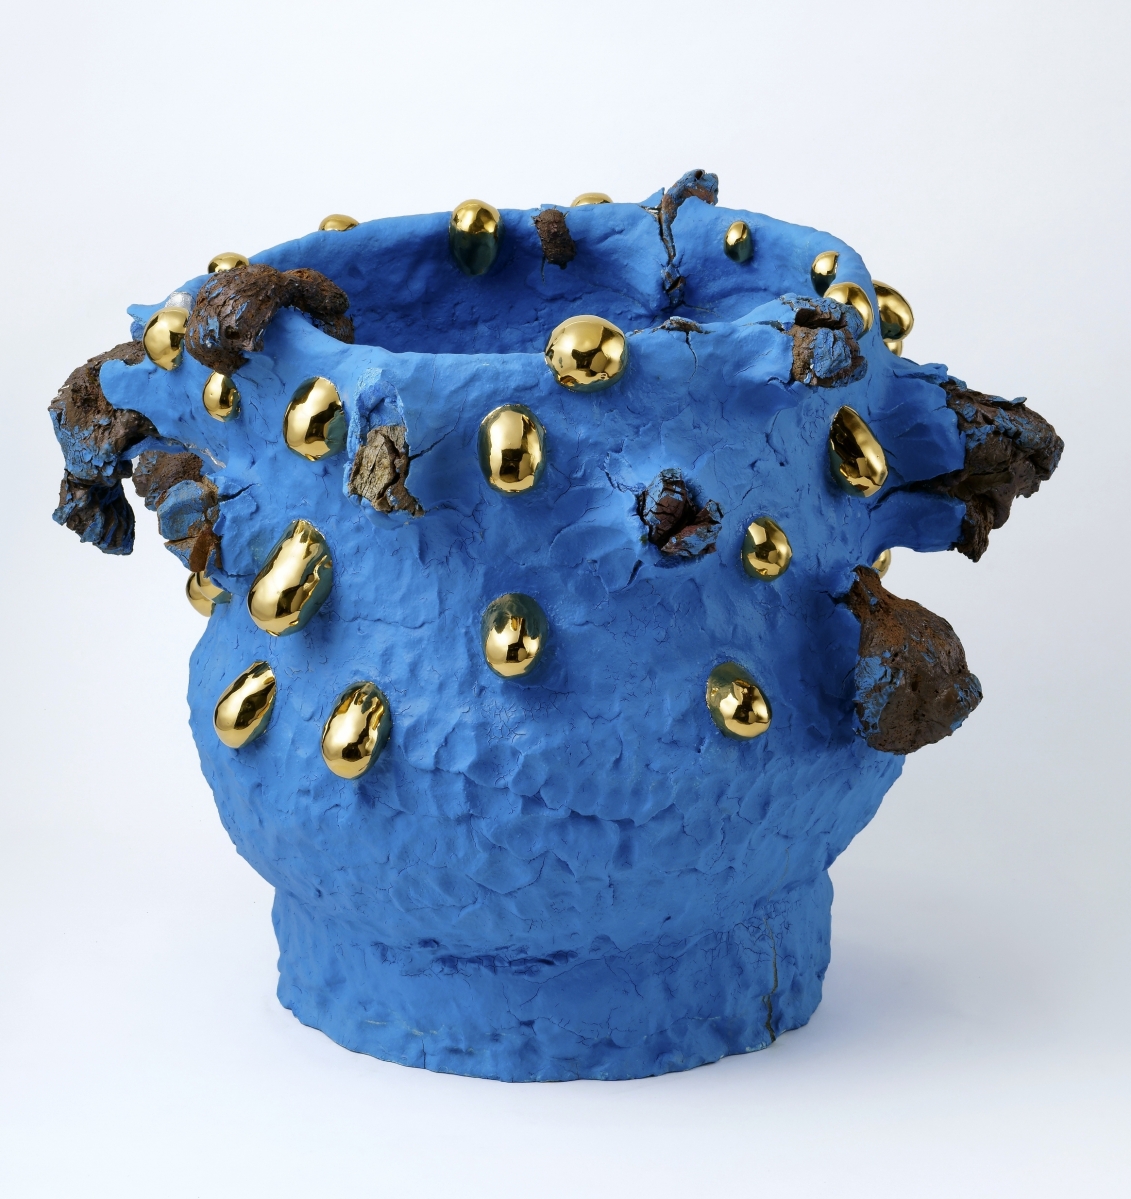 Untitled sculpture by Takuro Kuwata, 2016. Porcelain, stone, glaze, pigment, gold, lacquer; height 22-4/5 inches. Courtesy the artist, Salon 94, New York, and Alison Jacques Gallery.